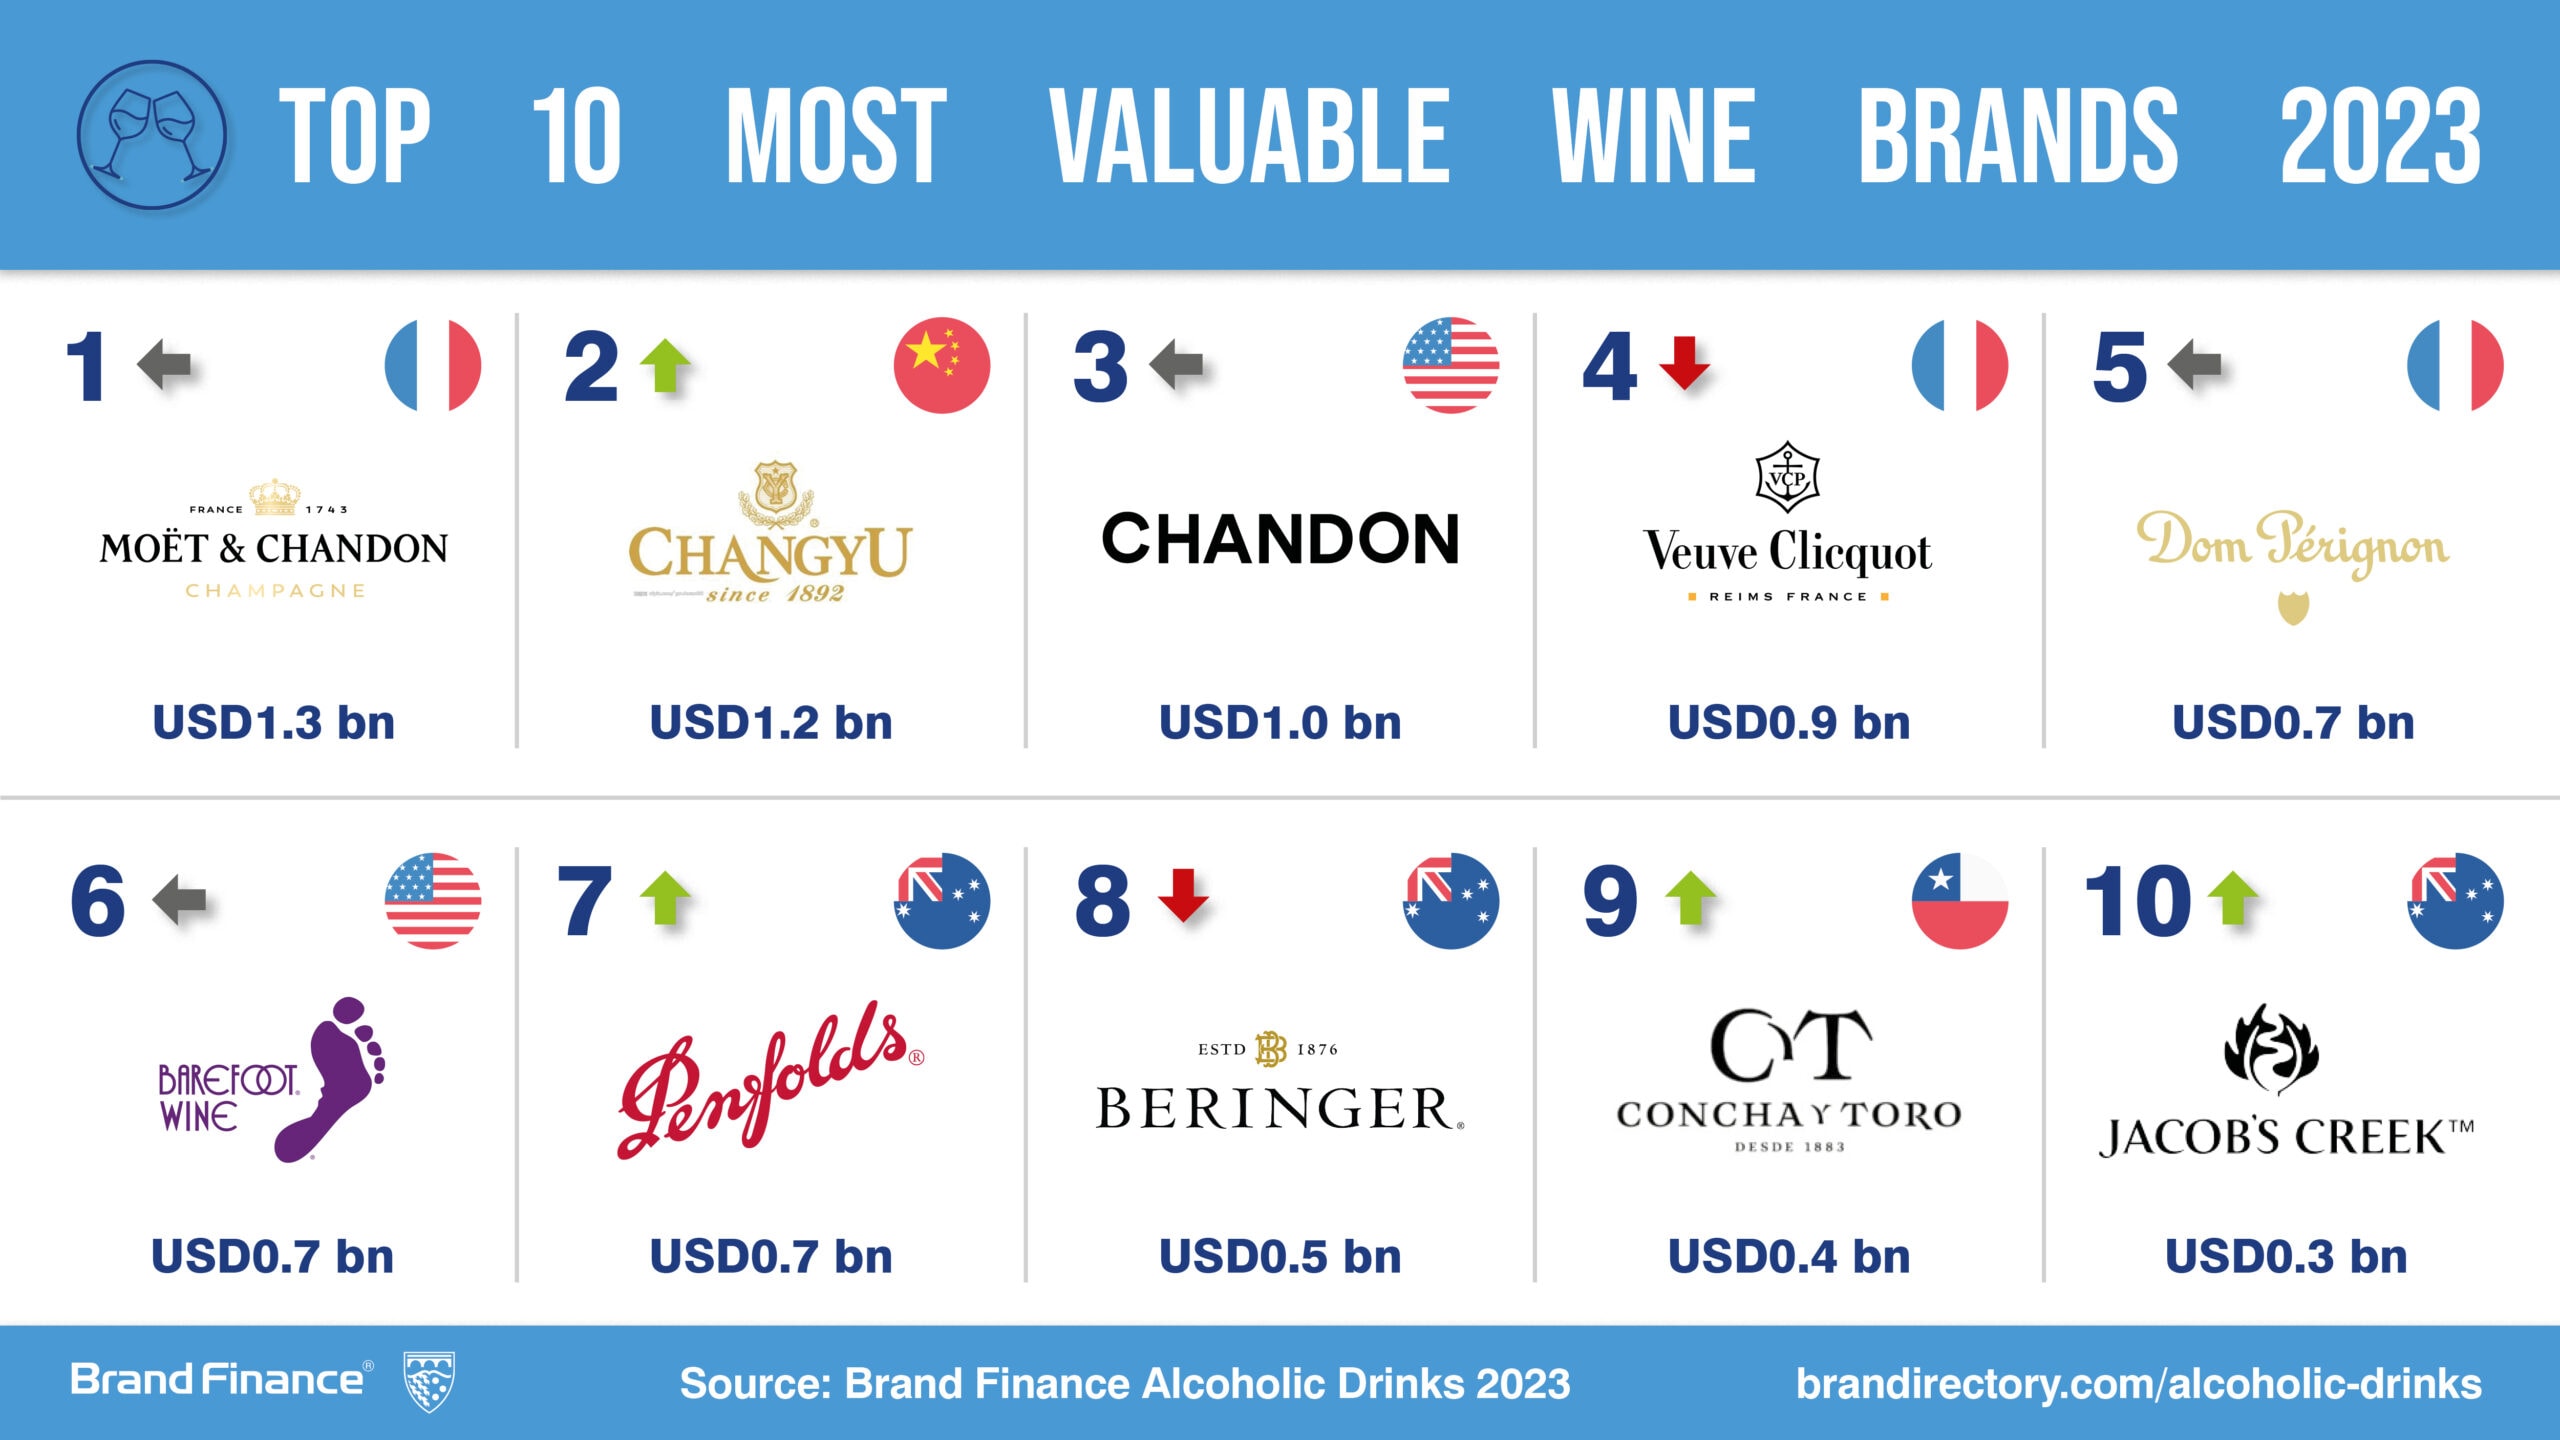 Chinese wine? Changyu brand challenges Moët & Chandon for world’s most ...